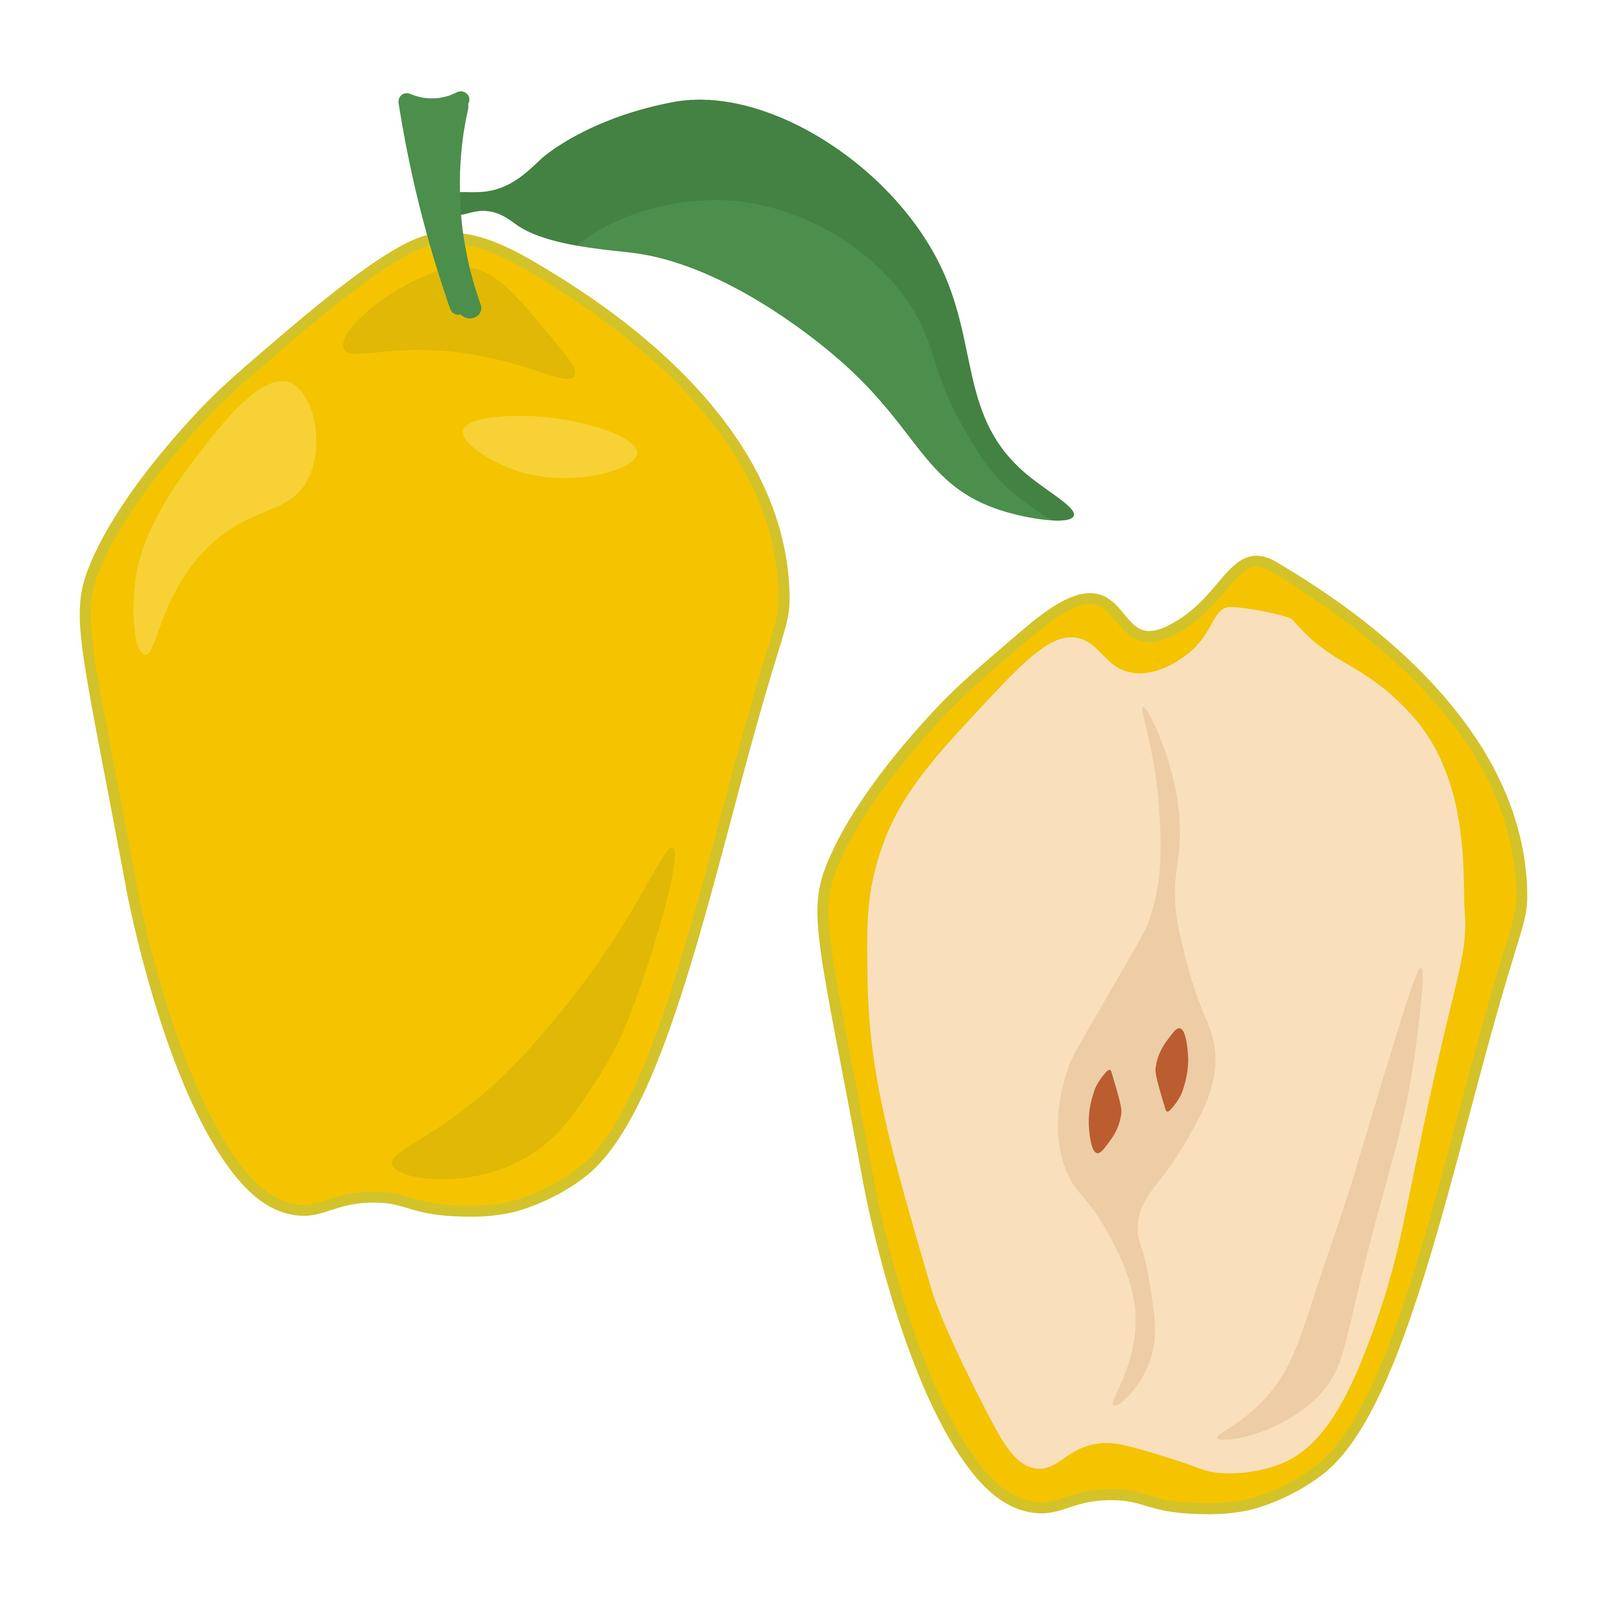 Quince fruit whole and half, juicy yellow fruit of an elongated shape with a green leaf vector illustration